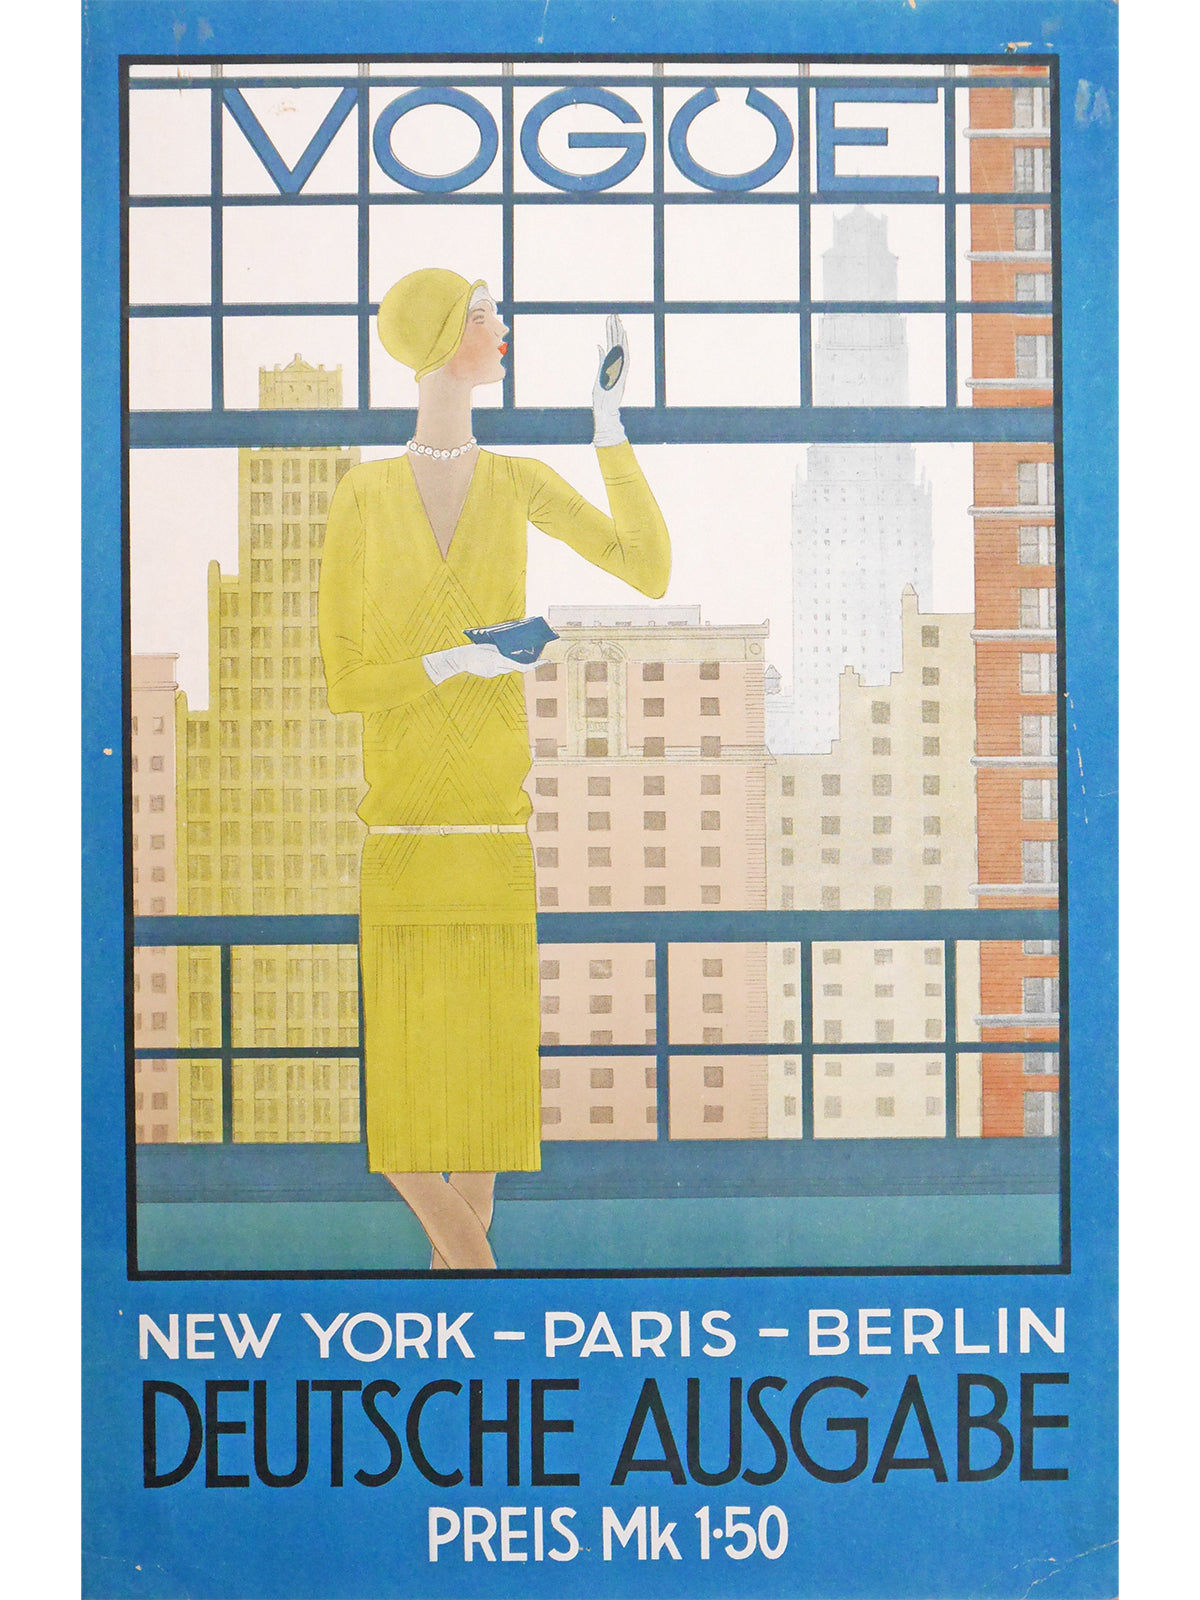 VOGUE Germany c. 1928 Advertising Poster Artwork by Georges Lepape